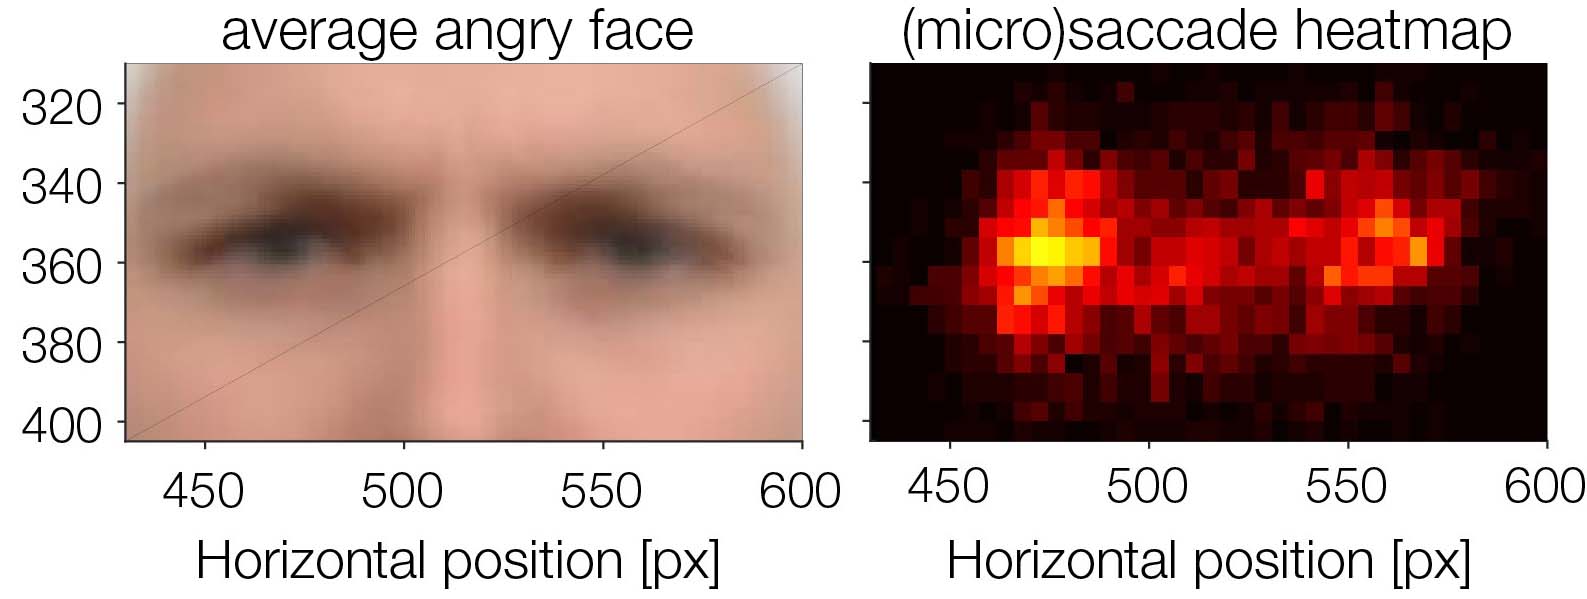 Angry face with heatmap of microsaccade endpoints on it